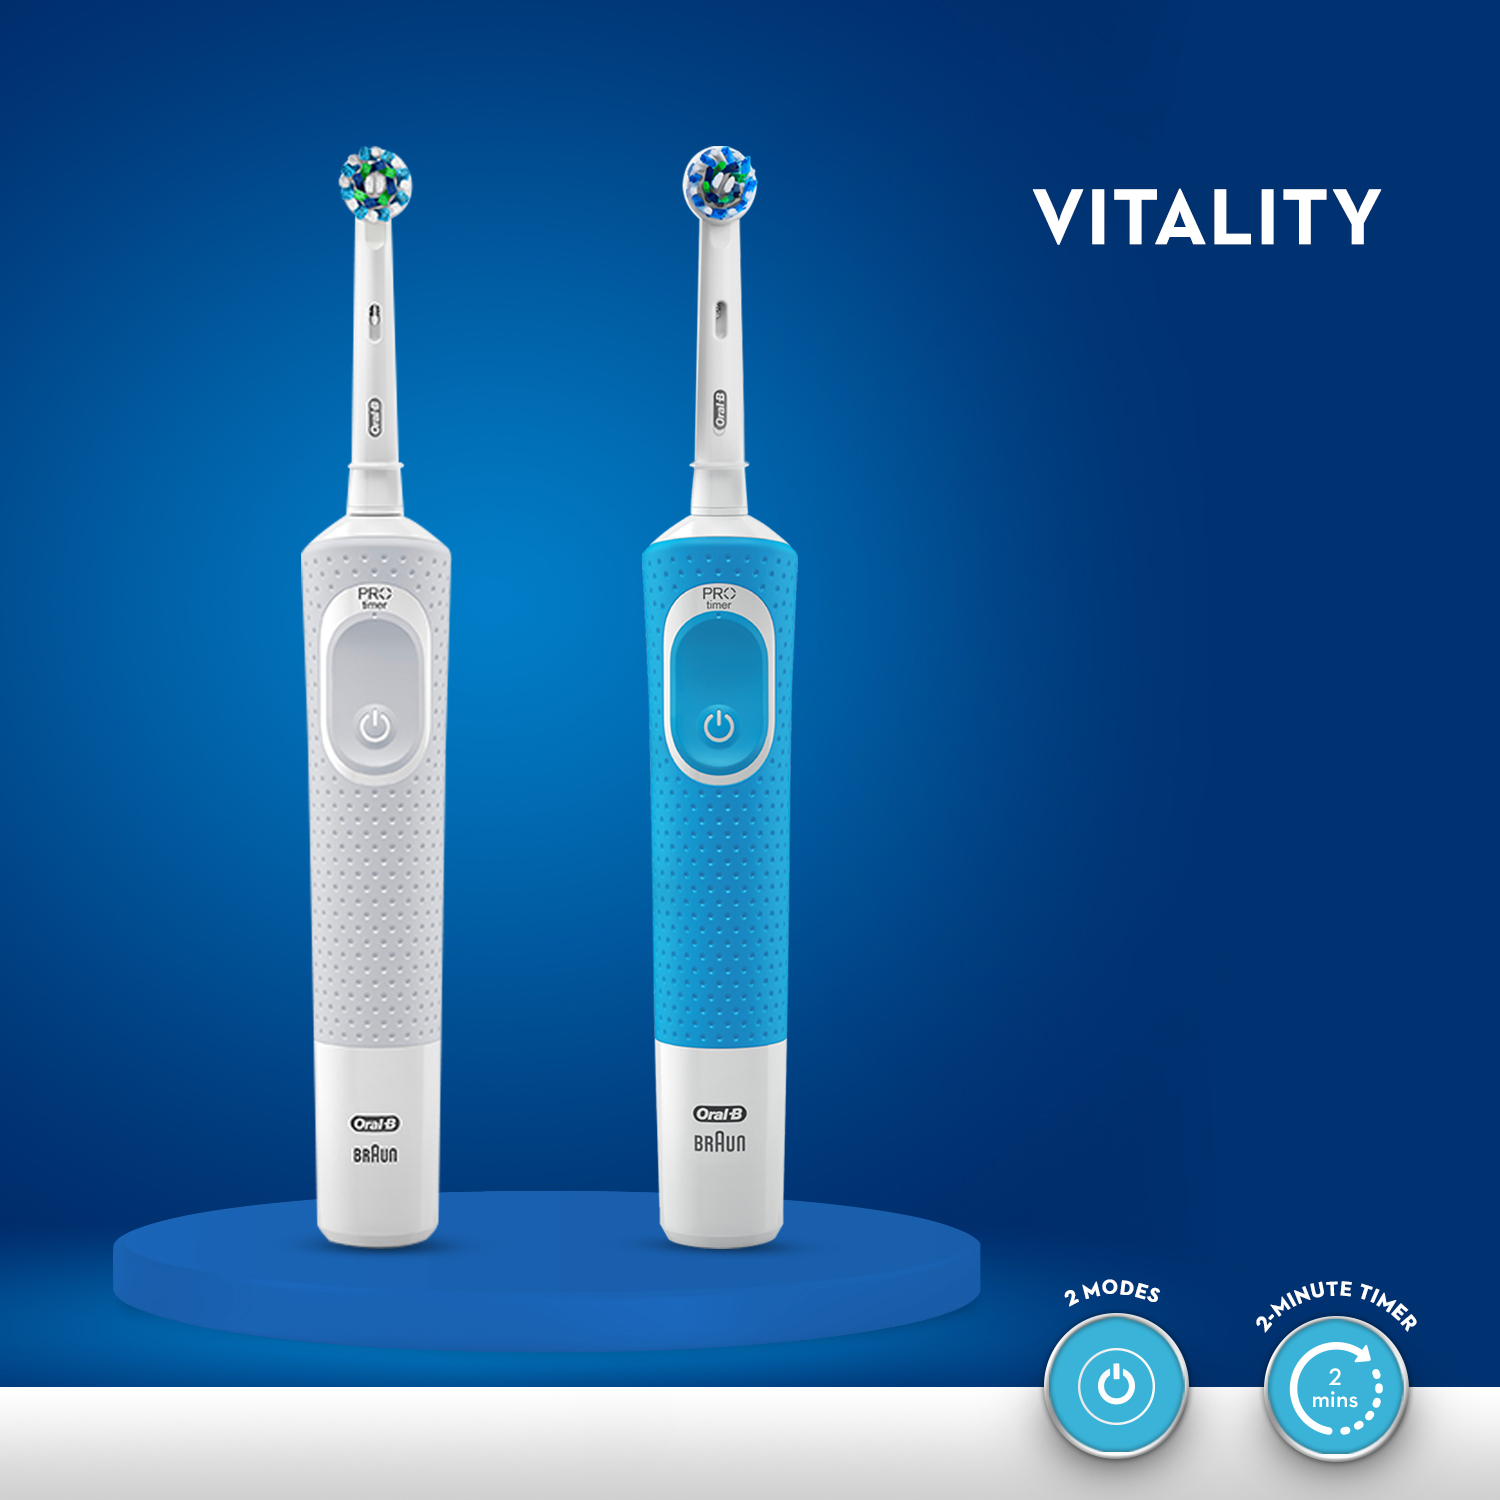 Oral B Vitality 100 White Criss Cross Electric Rechargeable Toothbrush Powered By Braun and Oral B Vitality 100 Blue Criss Cross Electric Rechargeable Toothbrush Powered by